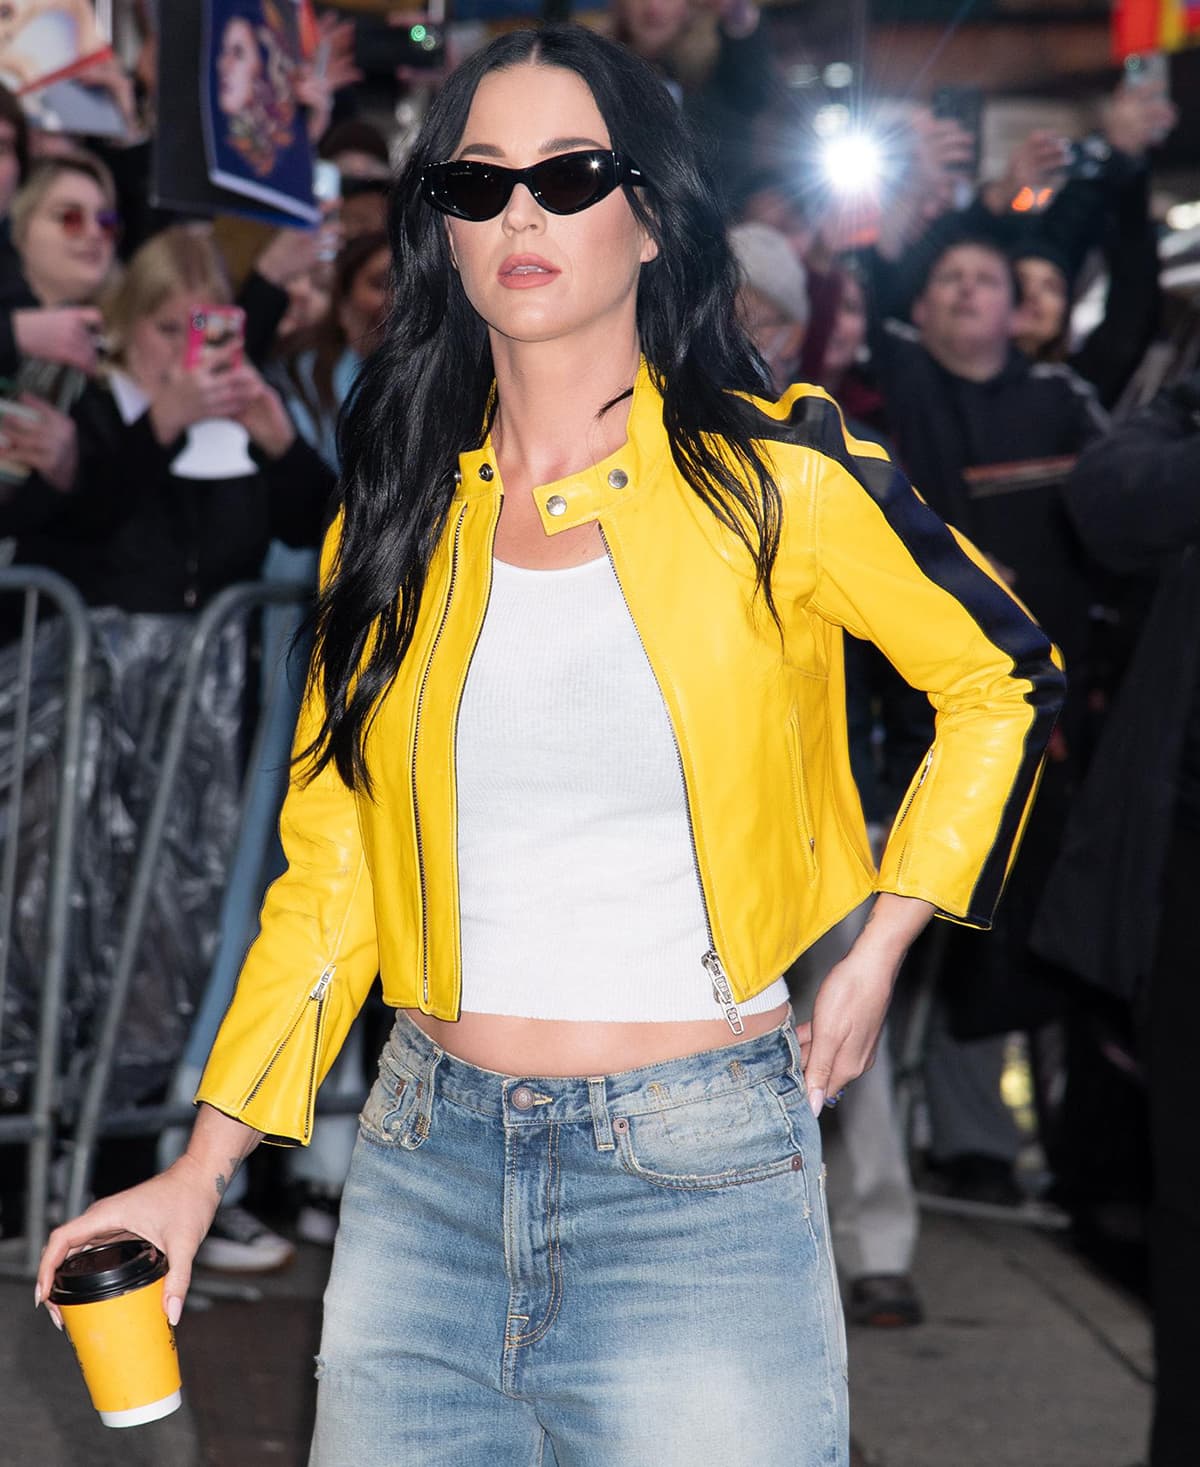 Katy Perry keeps the look cool with cat-eye sunglasses and loose waves hairstyle